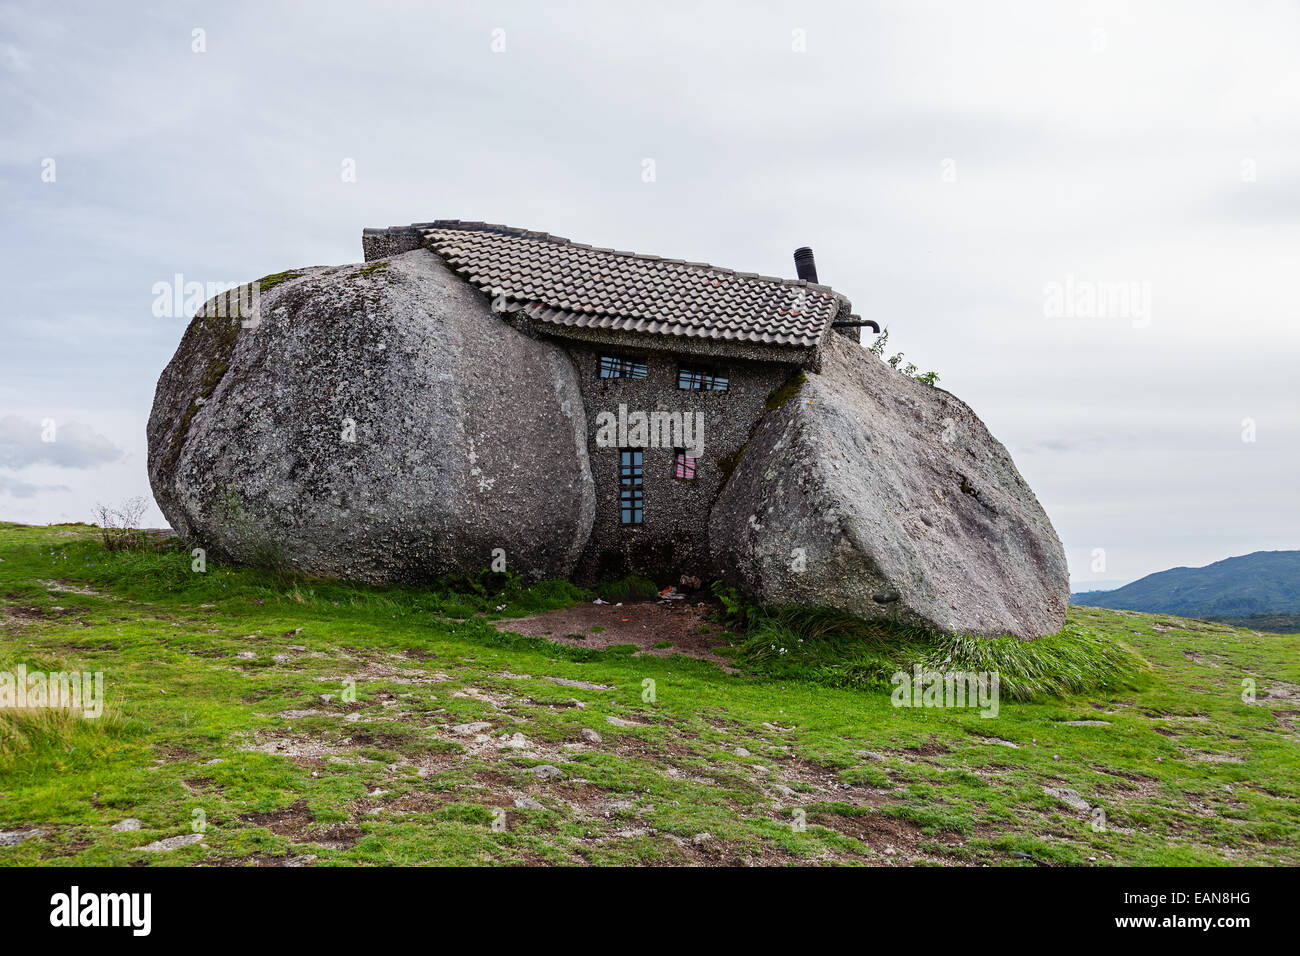 Casa do Penedo, a house built between huge rocks. Considered one of the strangest houses in the world. Fafe, Portugal. stone boulders strange unique Stock Photo